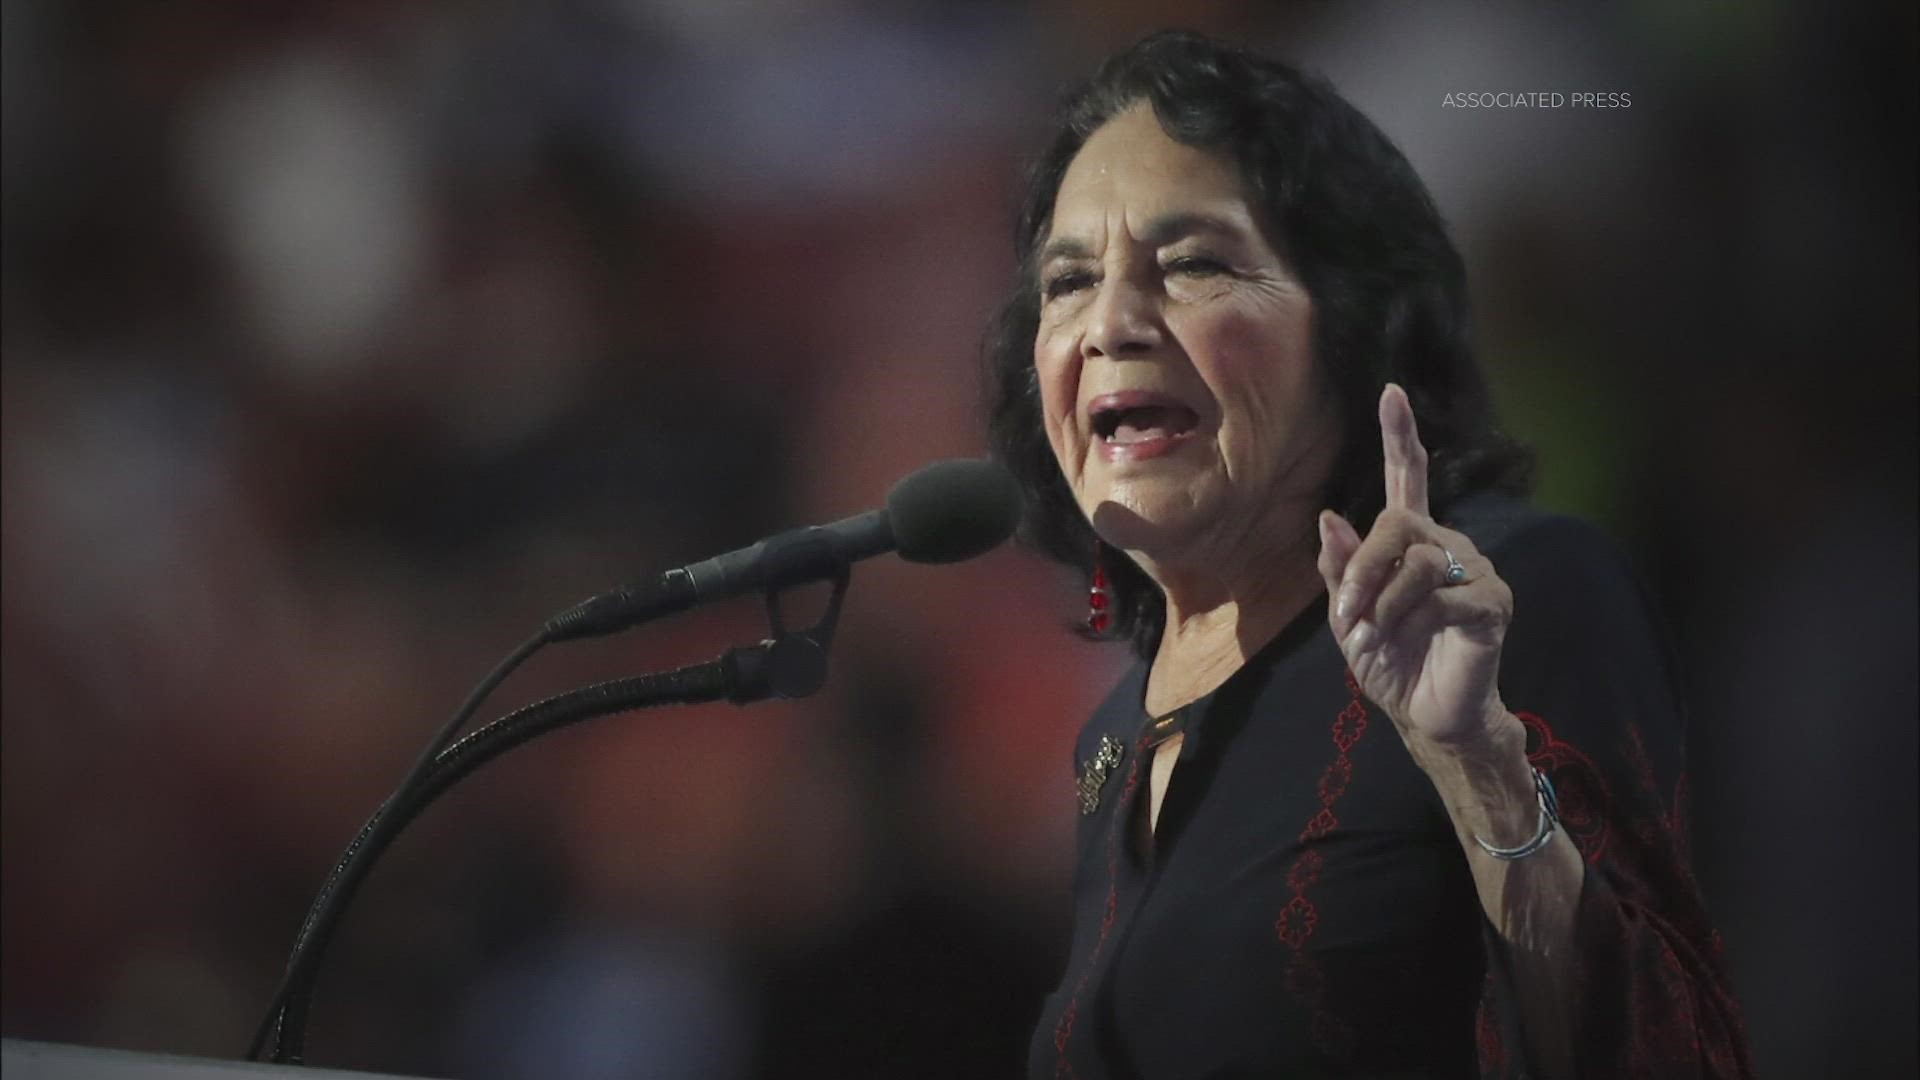 Legendary labor activist Dolores Huerta says there have been strides in the farm labor movement, but there's still more work to be done.